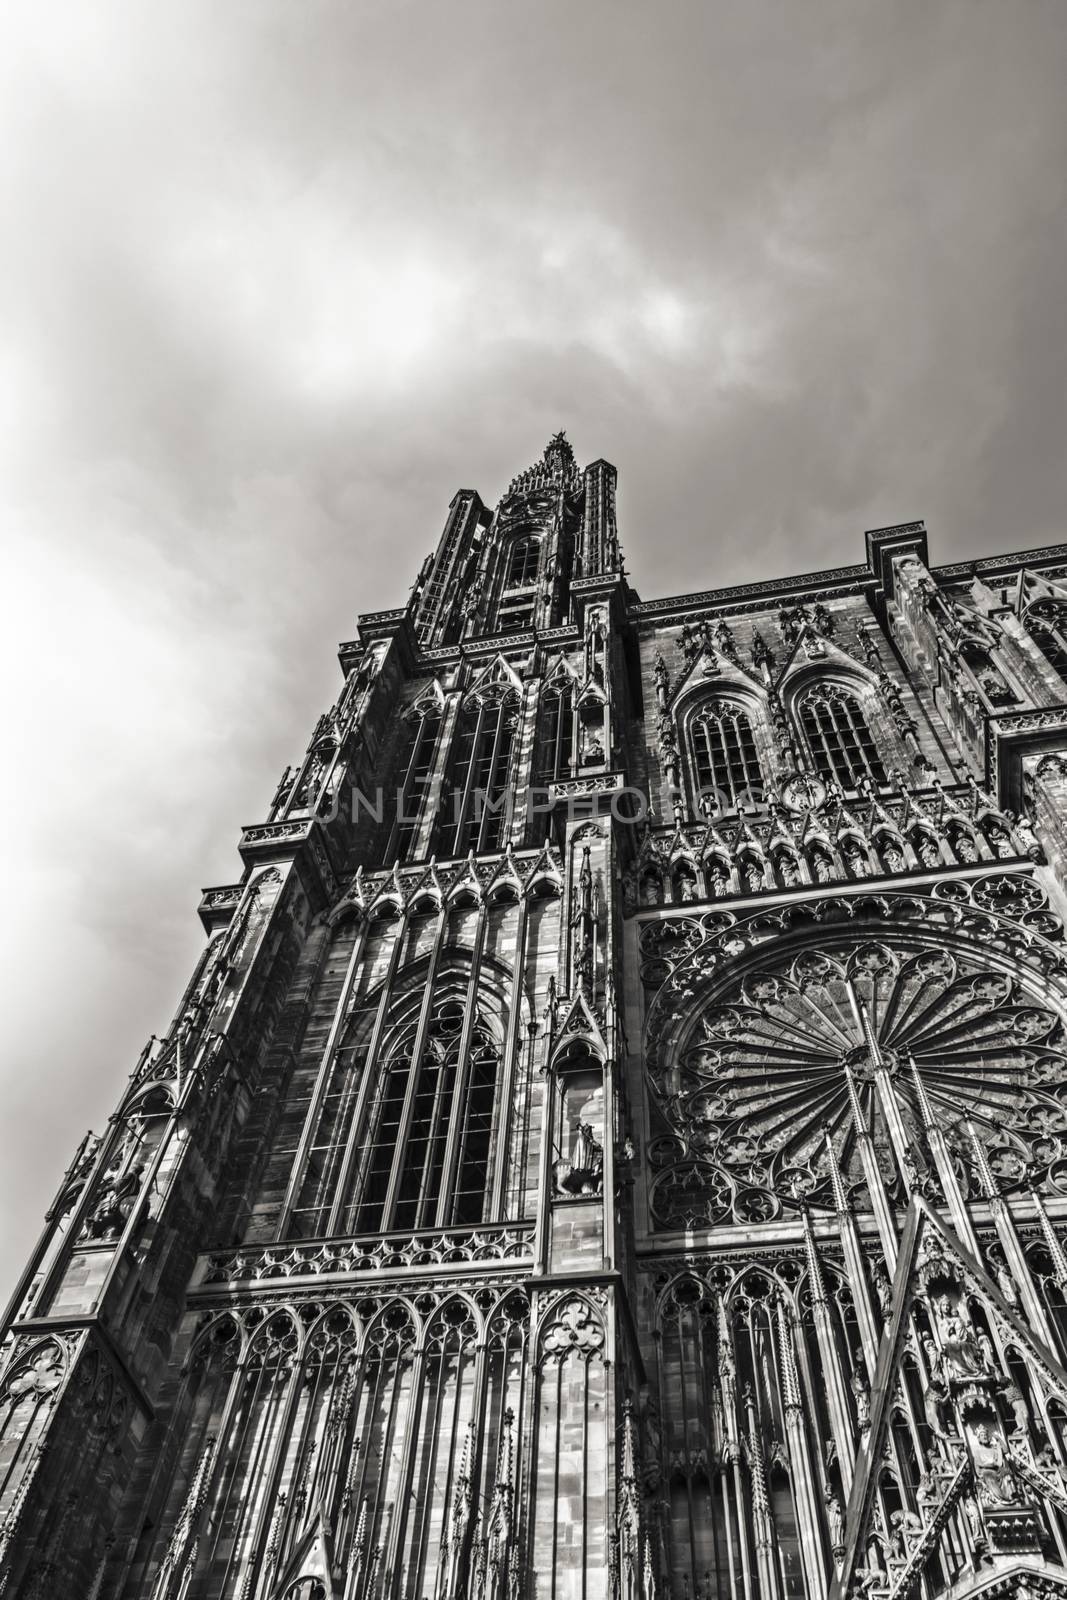 France, Alsace, June 2015: Imposing frontage of Strasbourg Notre Dame Cathedral frontage in Black & white